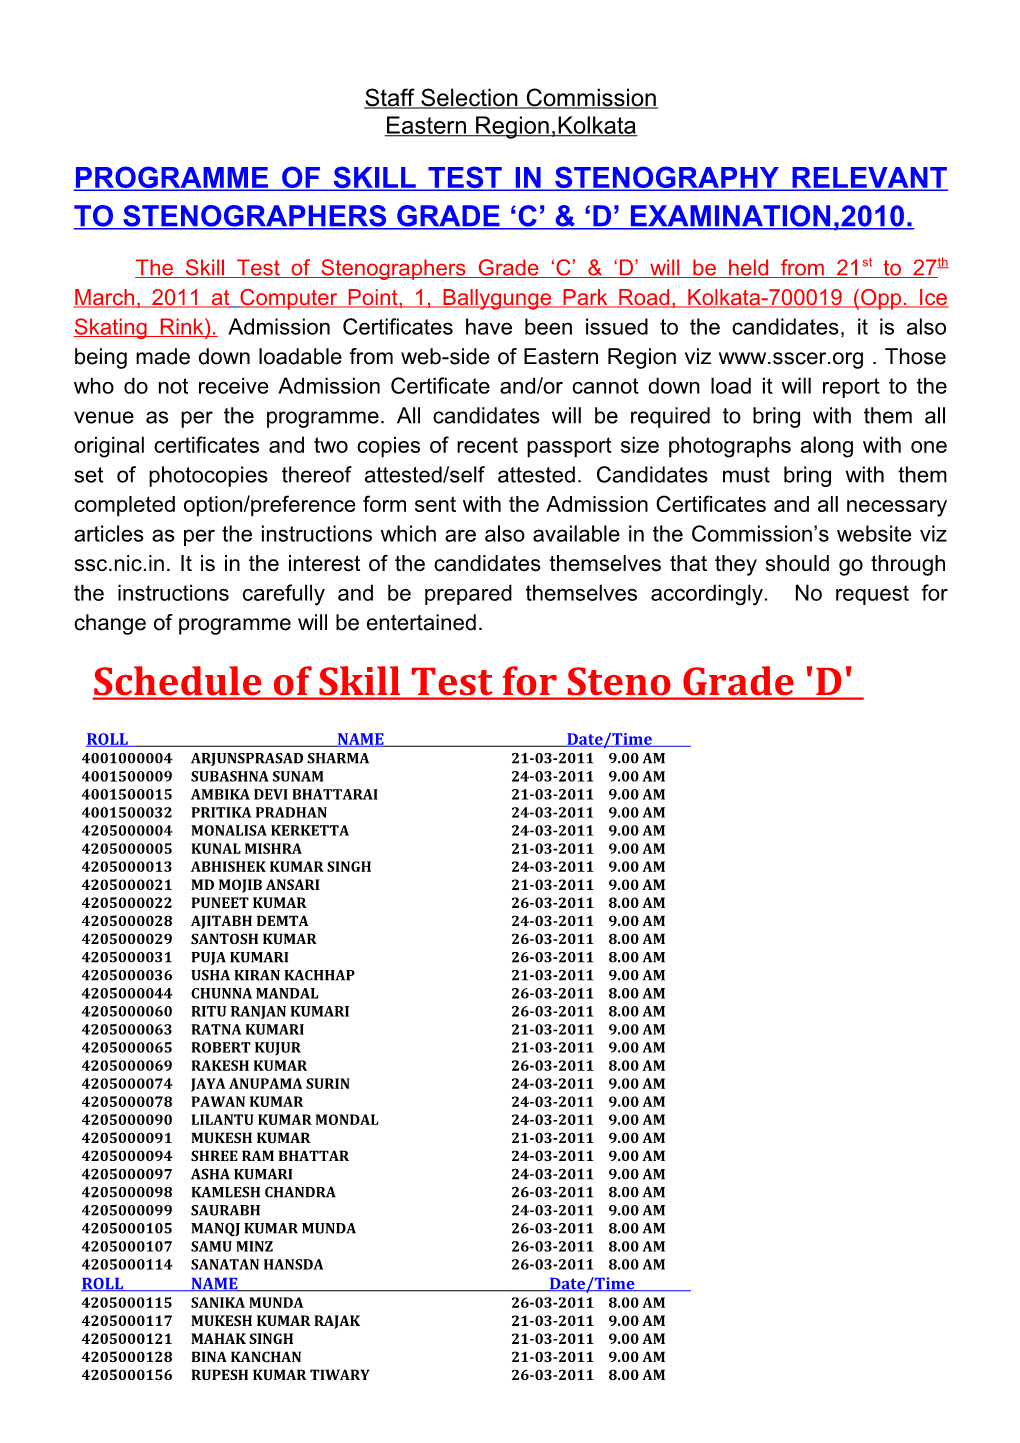 Programme of Skill Test in Stenography Relevant to Stenographers Grade C & D Examination,2010